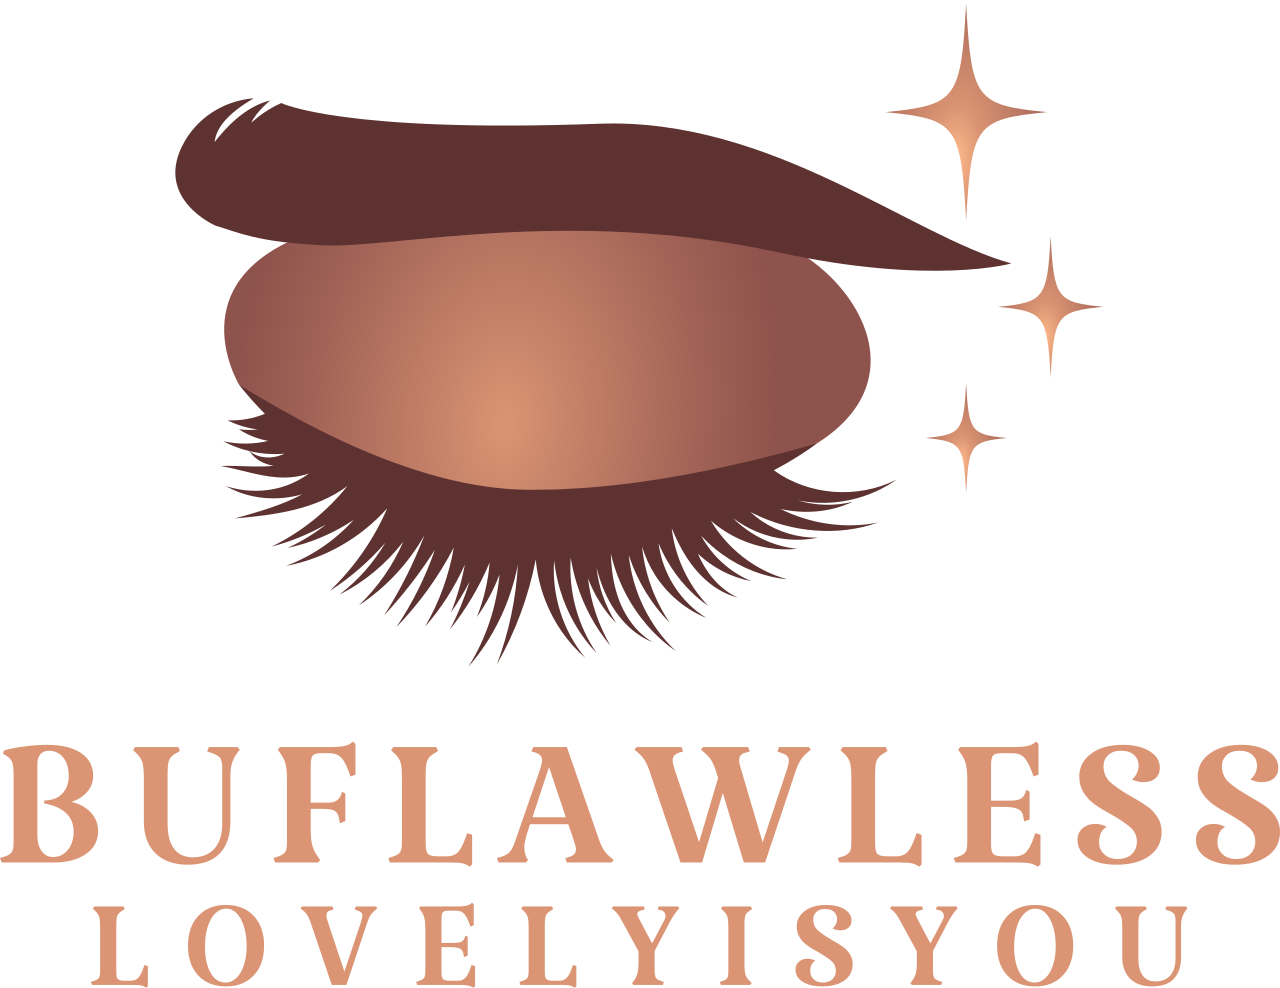 BUFlawless's web page